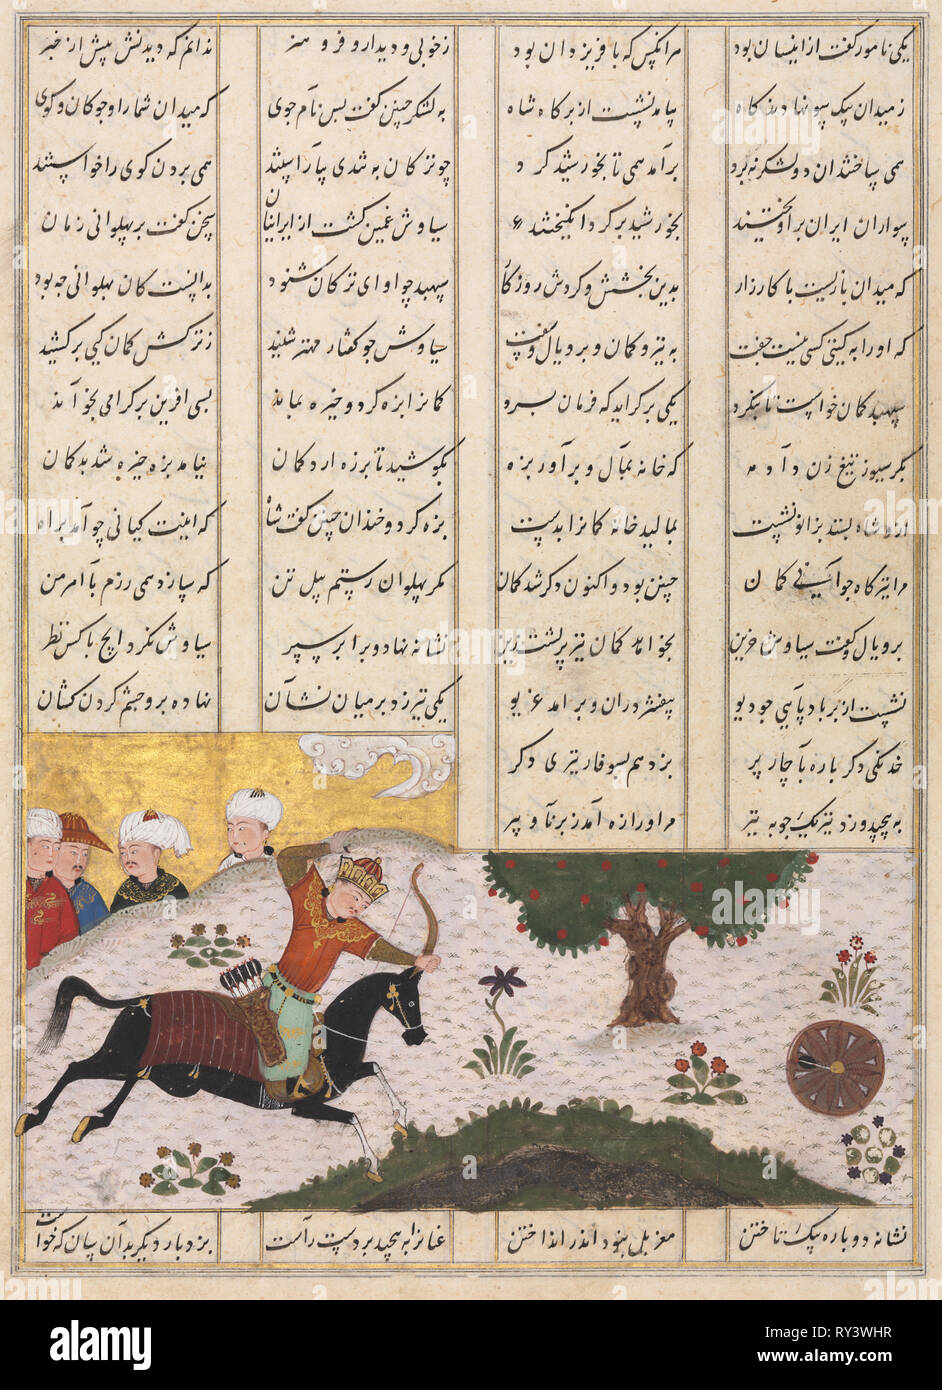 Siyavush on his Horse Hitting a Rolling Target (recto)  from a Shahnama (Book of Kings) of Firdausi (940-1019 or 1025), late 1400s. Iran, Shiraz, Timurid period (1370-1501). Opaque watercolor, ink, and gold on paper; image: 8.6 x 16.1 cm (3 3/8 x 6 5/16 in.); overall: 32.4 x 21.6 cm (12 3/4 x 8 1/2 in.); text area: 22.6 x 16.1 cm (8 7/8 x 6 5/16 in Stock Photo